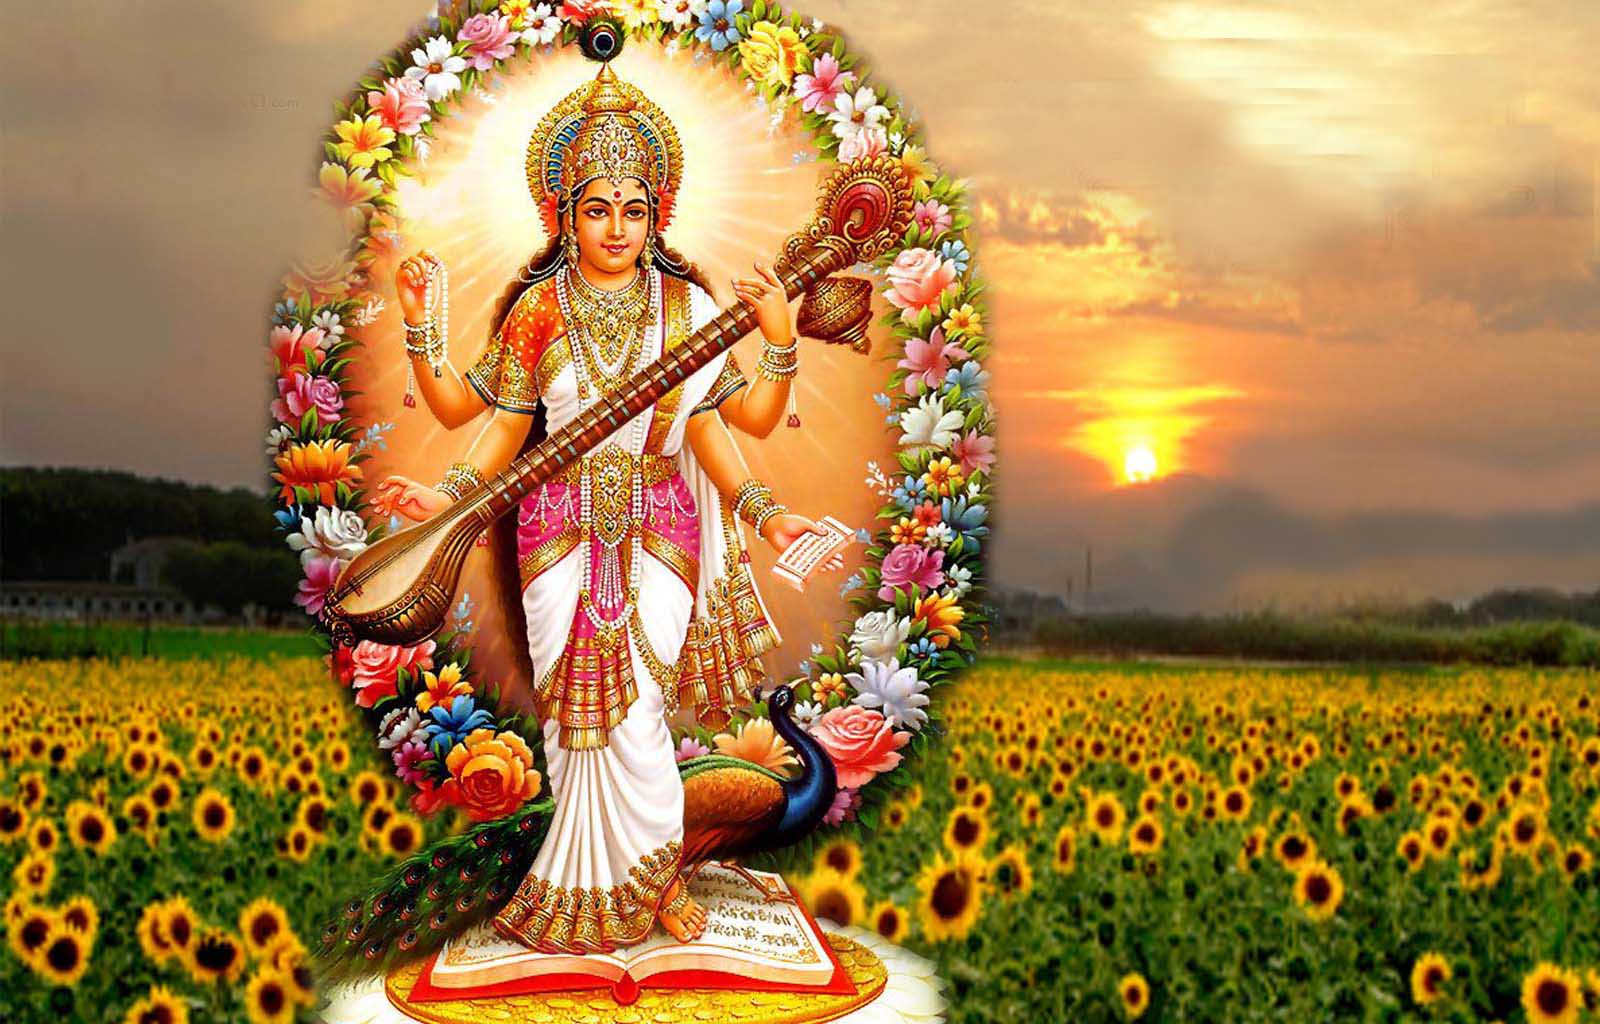 Happy Vasant Panchami 2020 Images, HD Pics, Ultra-HD Wallpapers, 4K Photos,  And UHD Pictures For WhatsApp, Instagram, Facebook, And Messenger